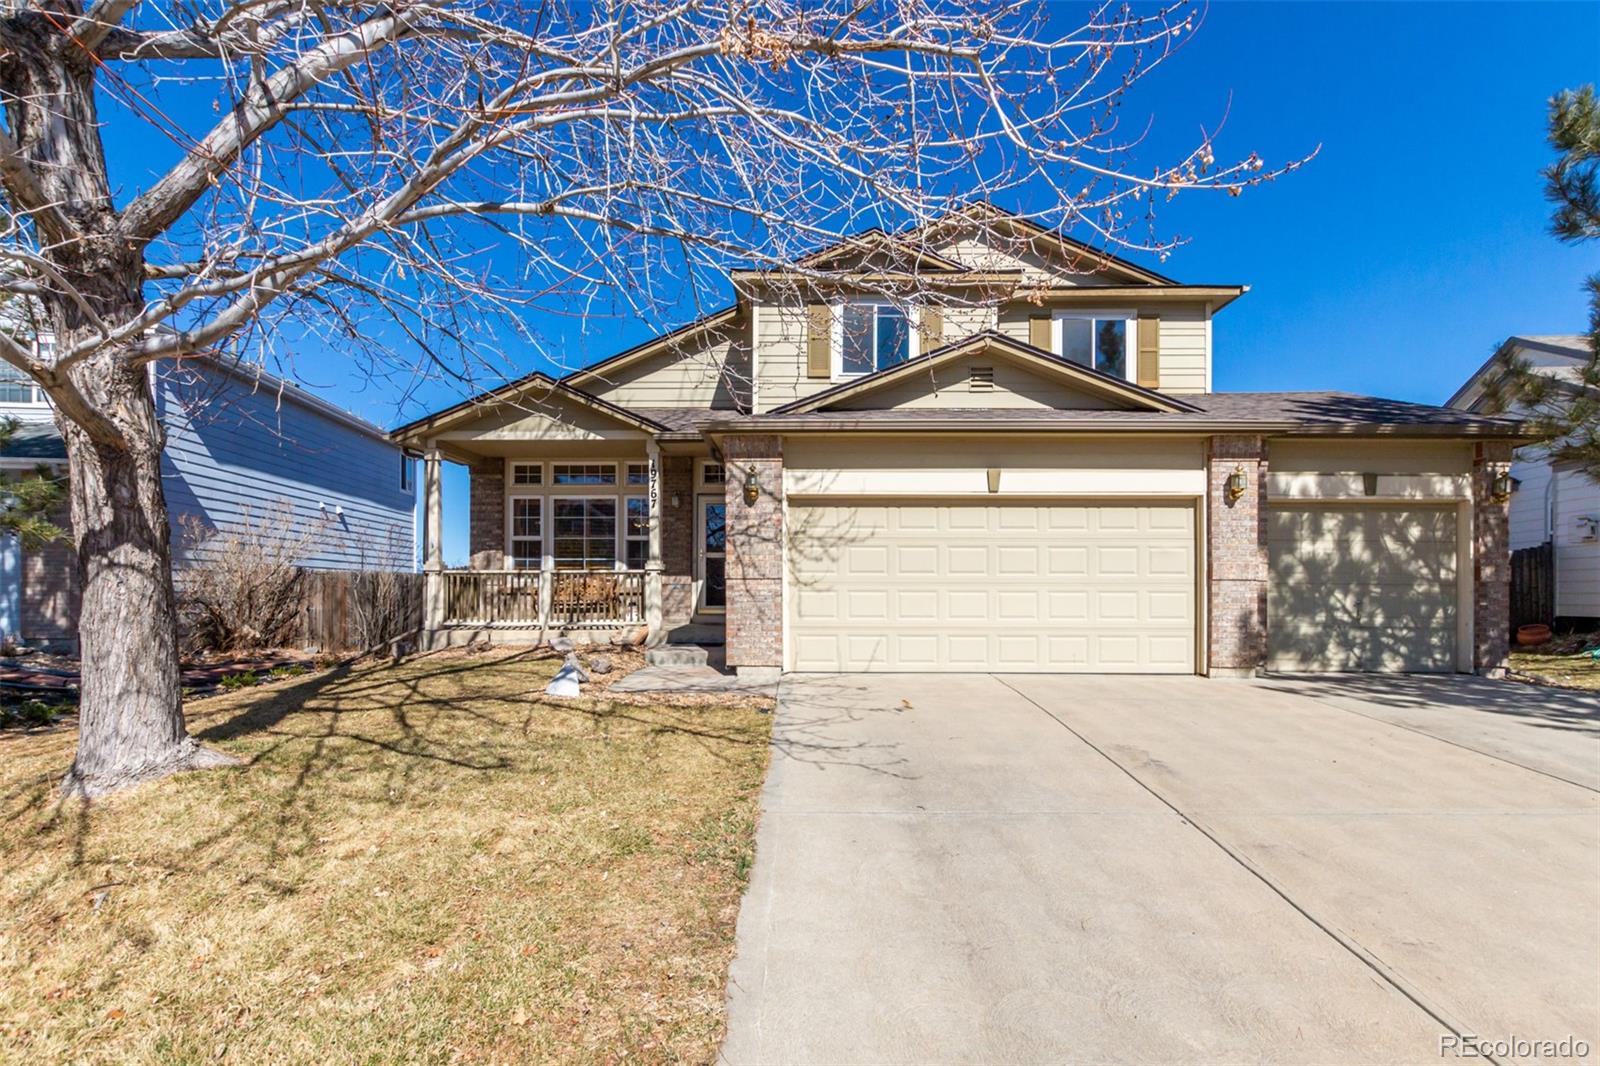 19767 e caspian circle, Aurora sold home. Closed on 2024-04-15 for $605,000.